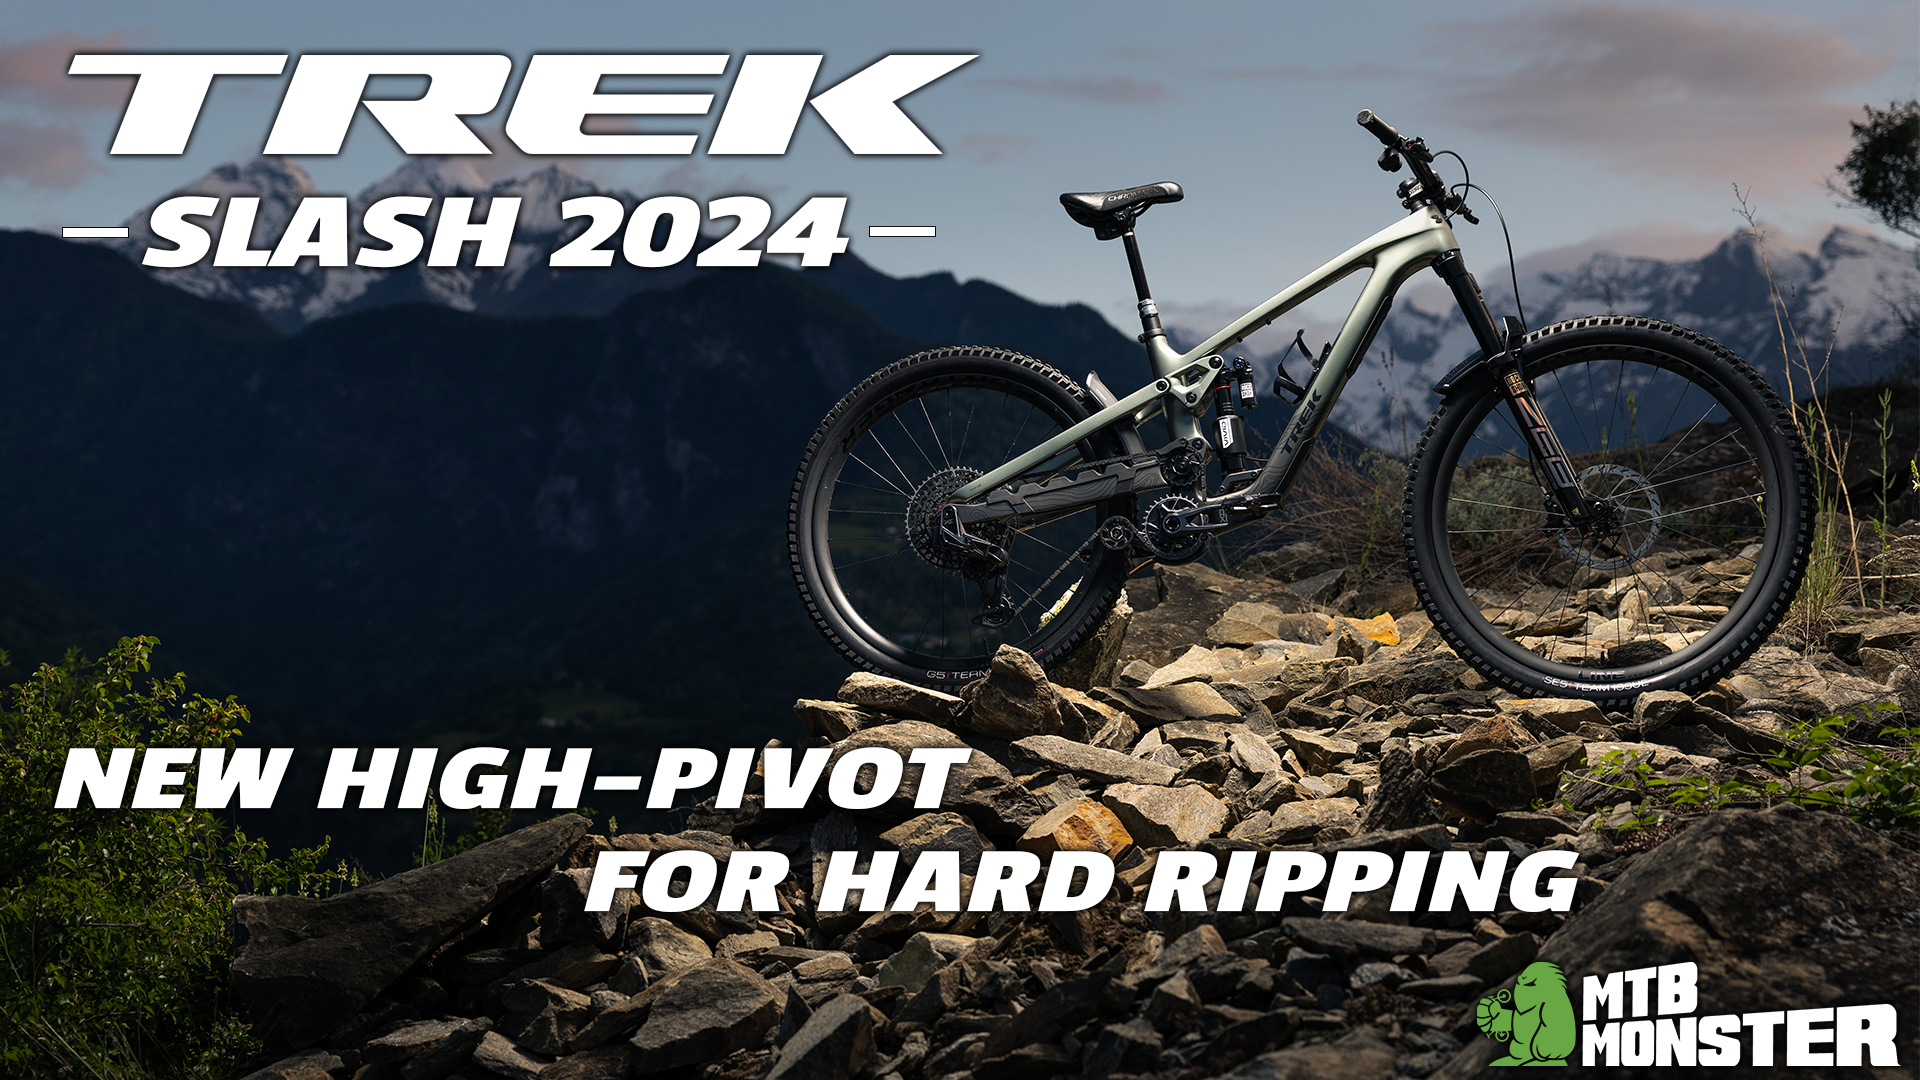 Introducing the allnew Trek Slash completely redesigned for the 2024